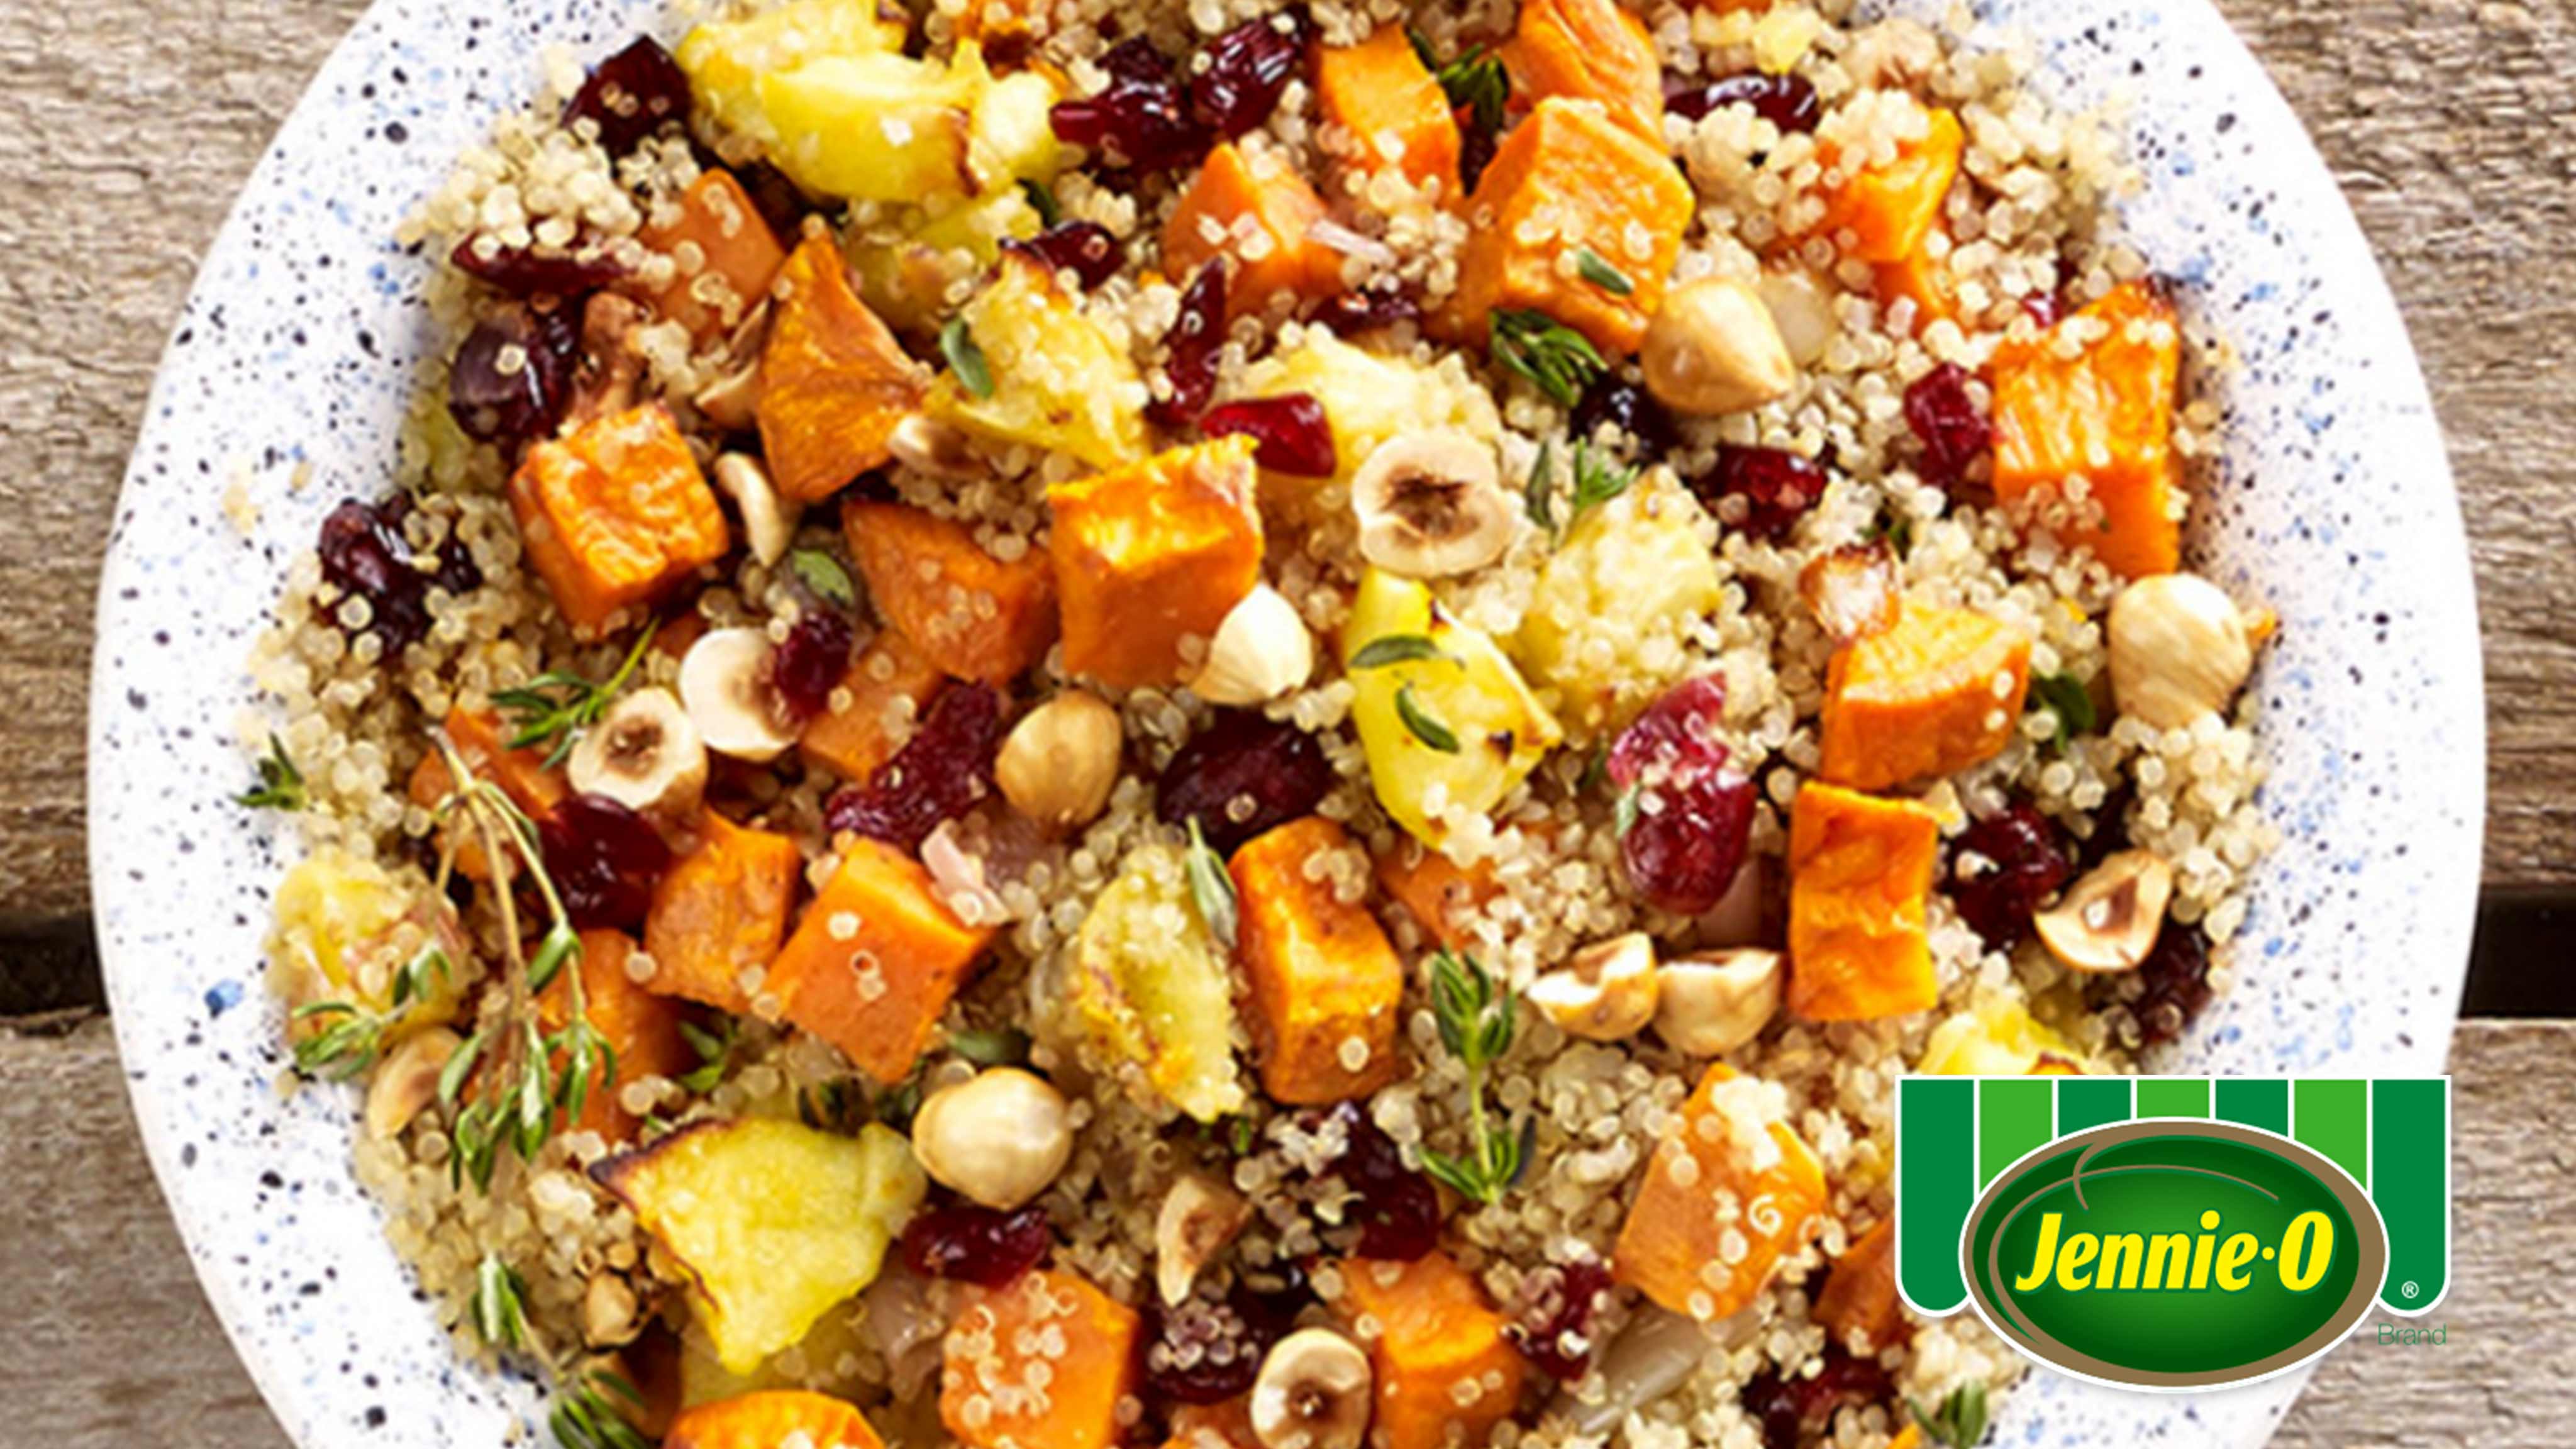 Image for Recipe Quinoa Stuffing with Sweet Potatoes, Apples and Hazelnuts